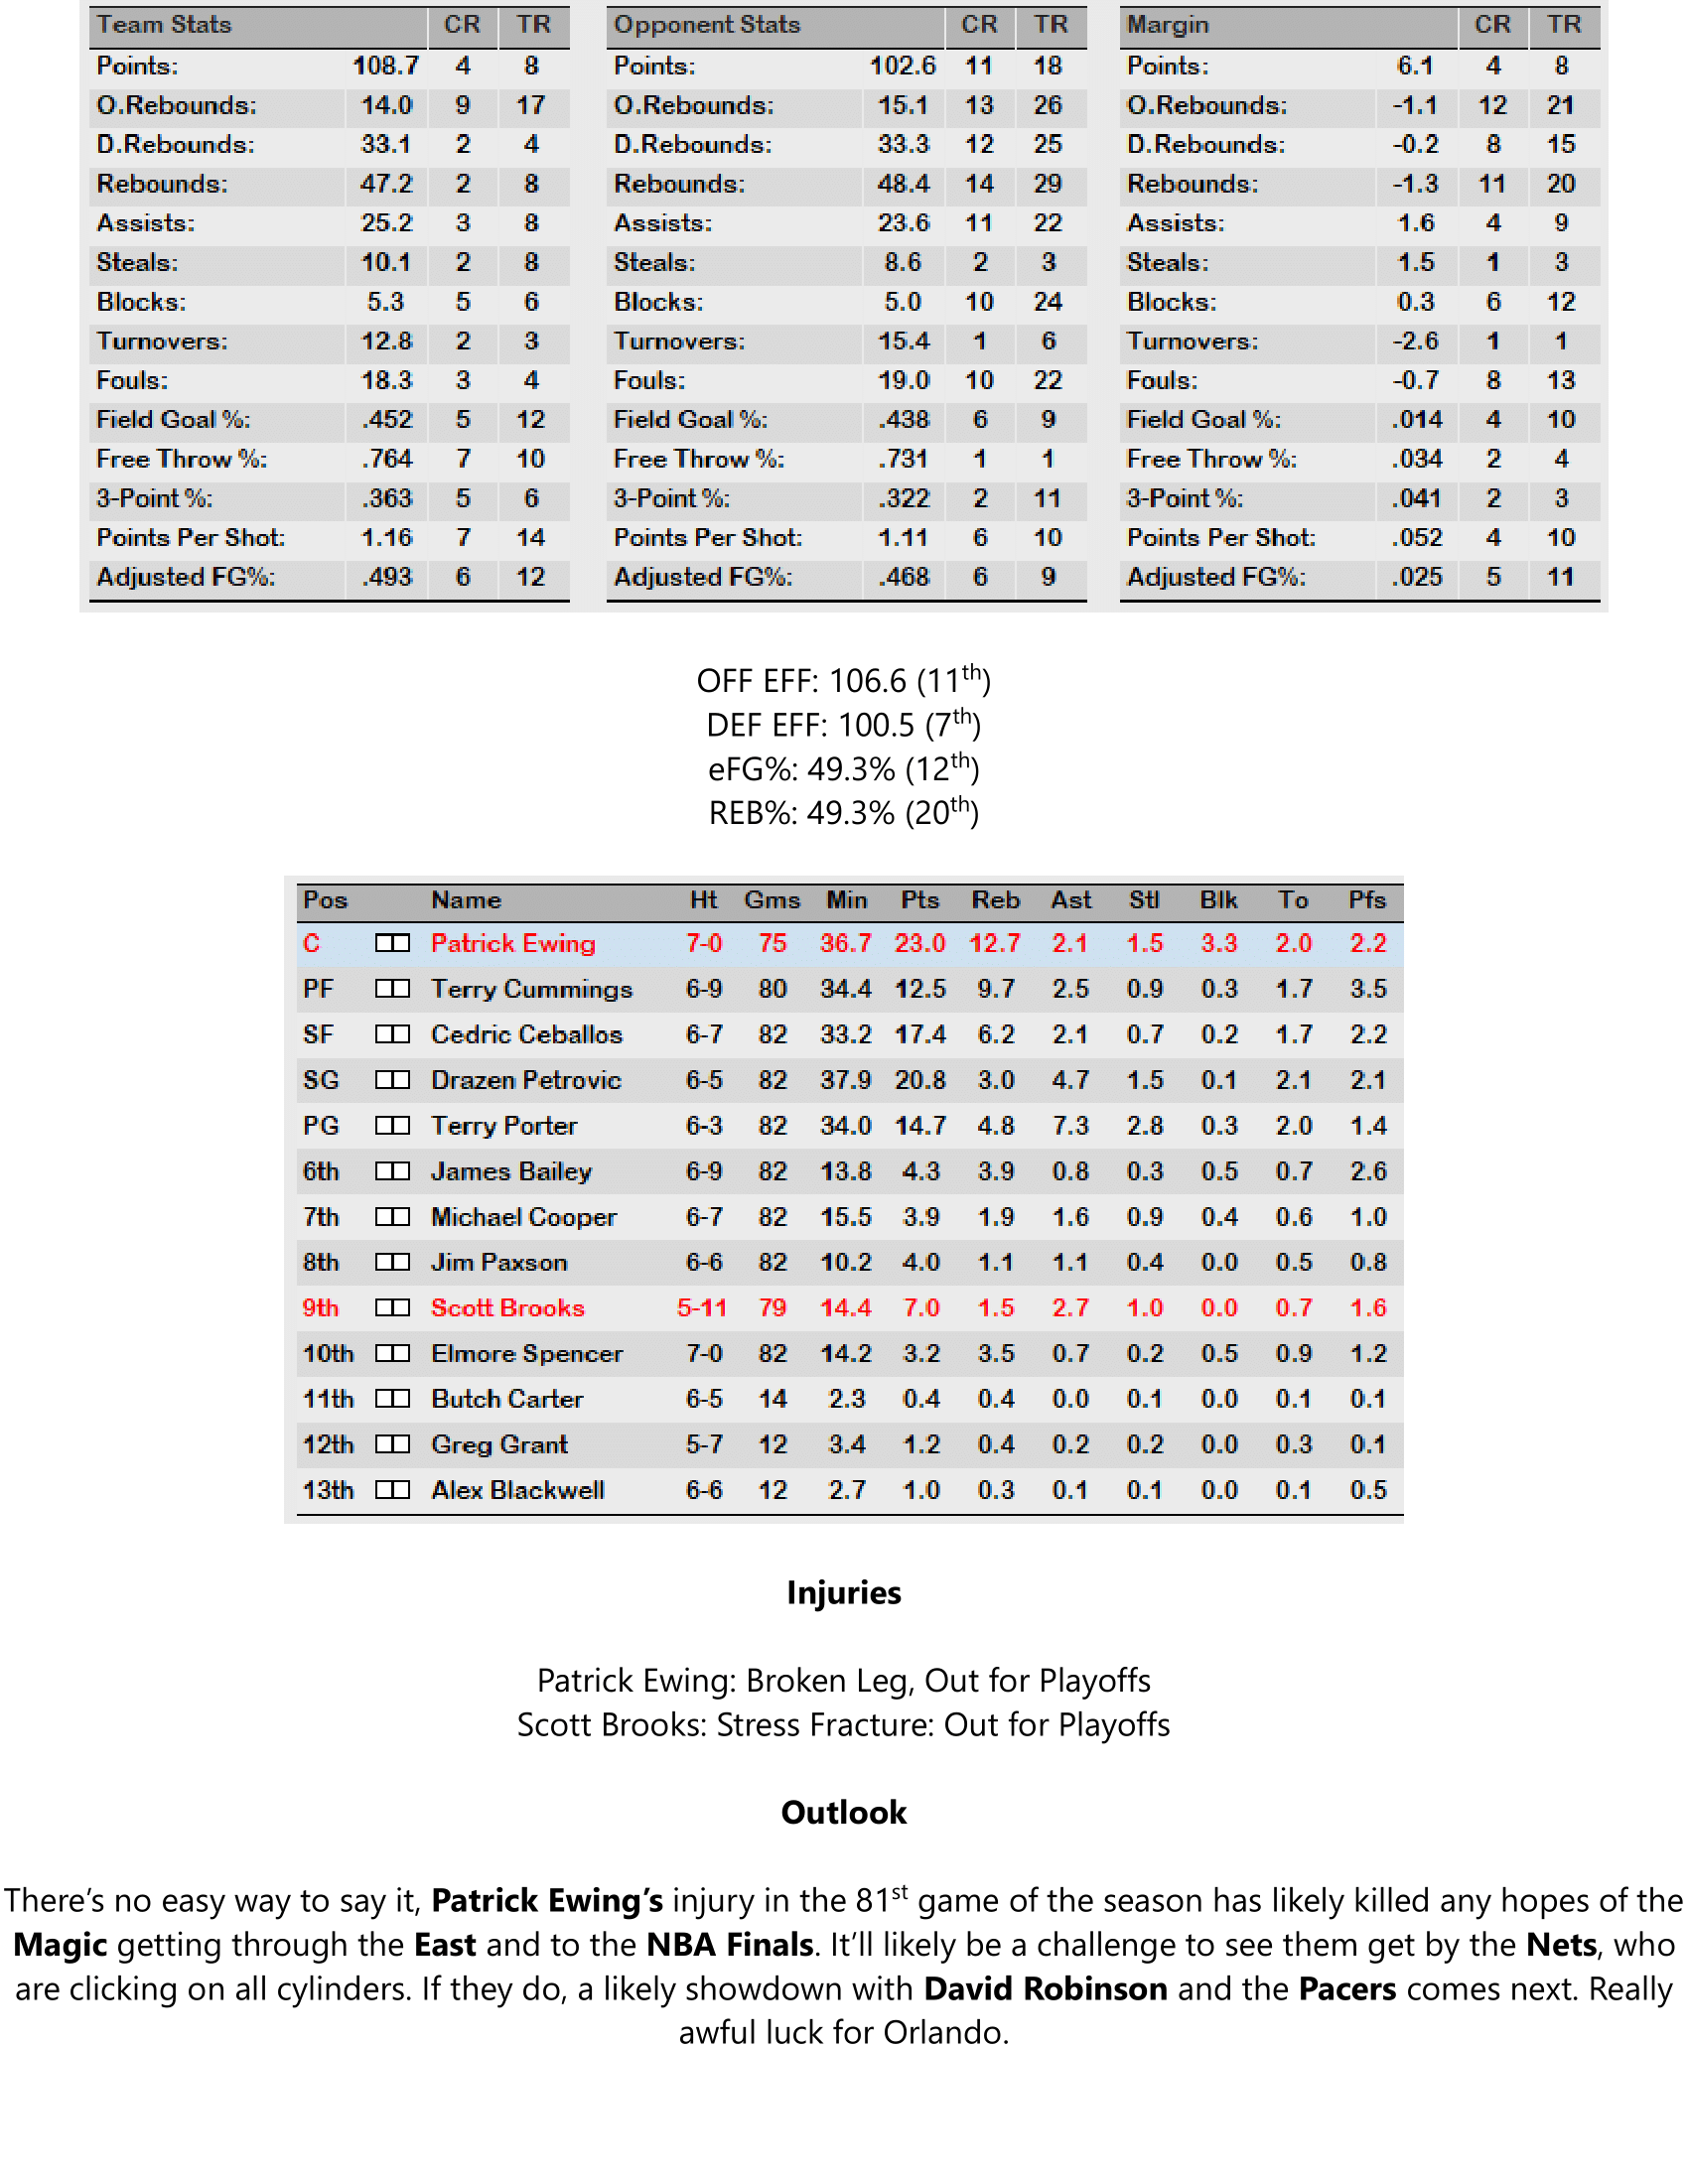 92-93-Part-4-Playoff-Preview-19.png